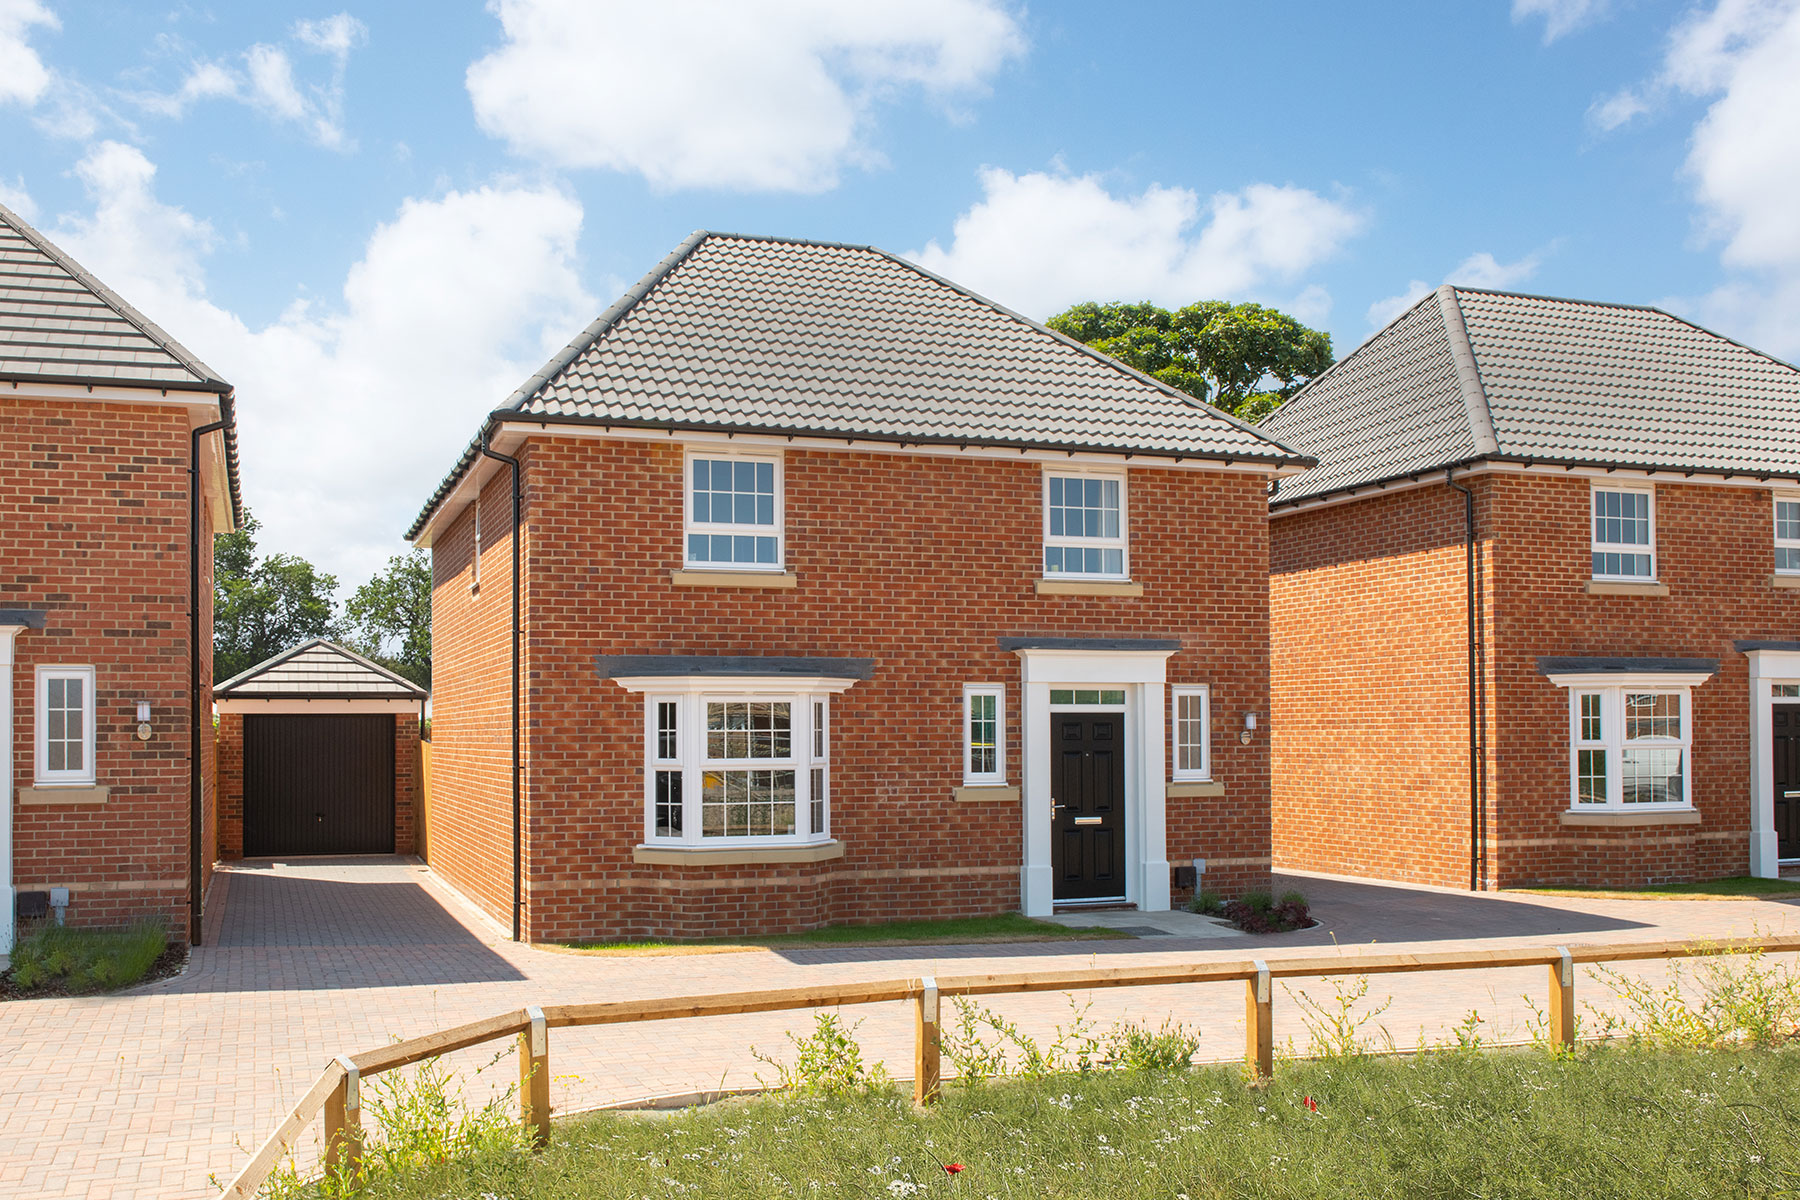 Property 1 of 10. The Kirkdale At Edwin Vale, Hatfield, Doncaster